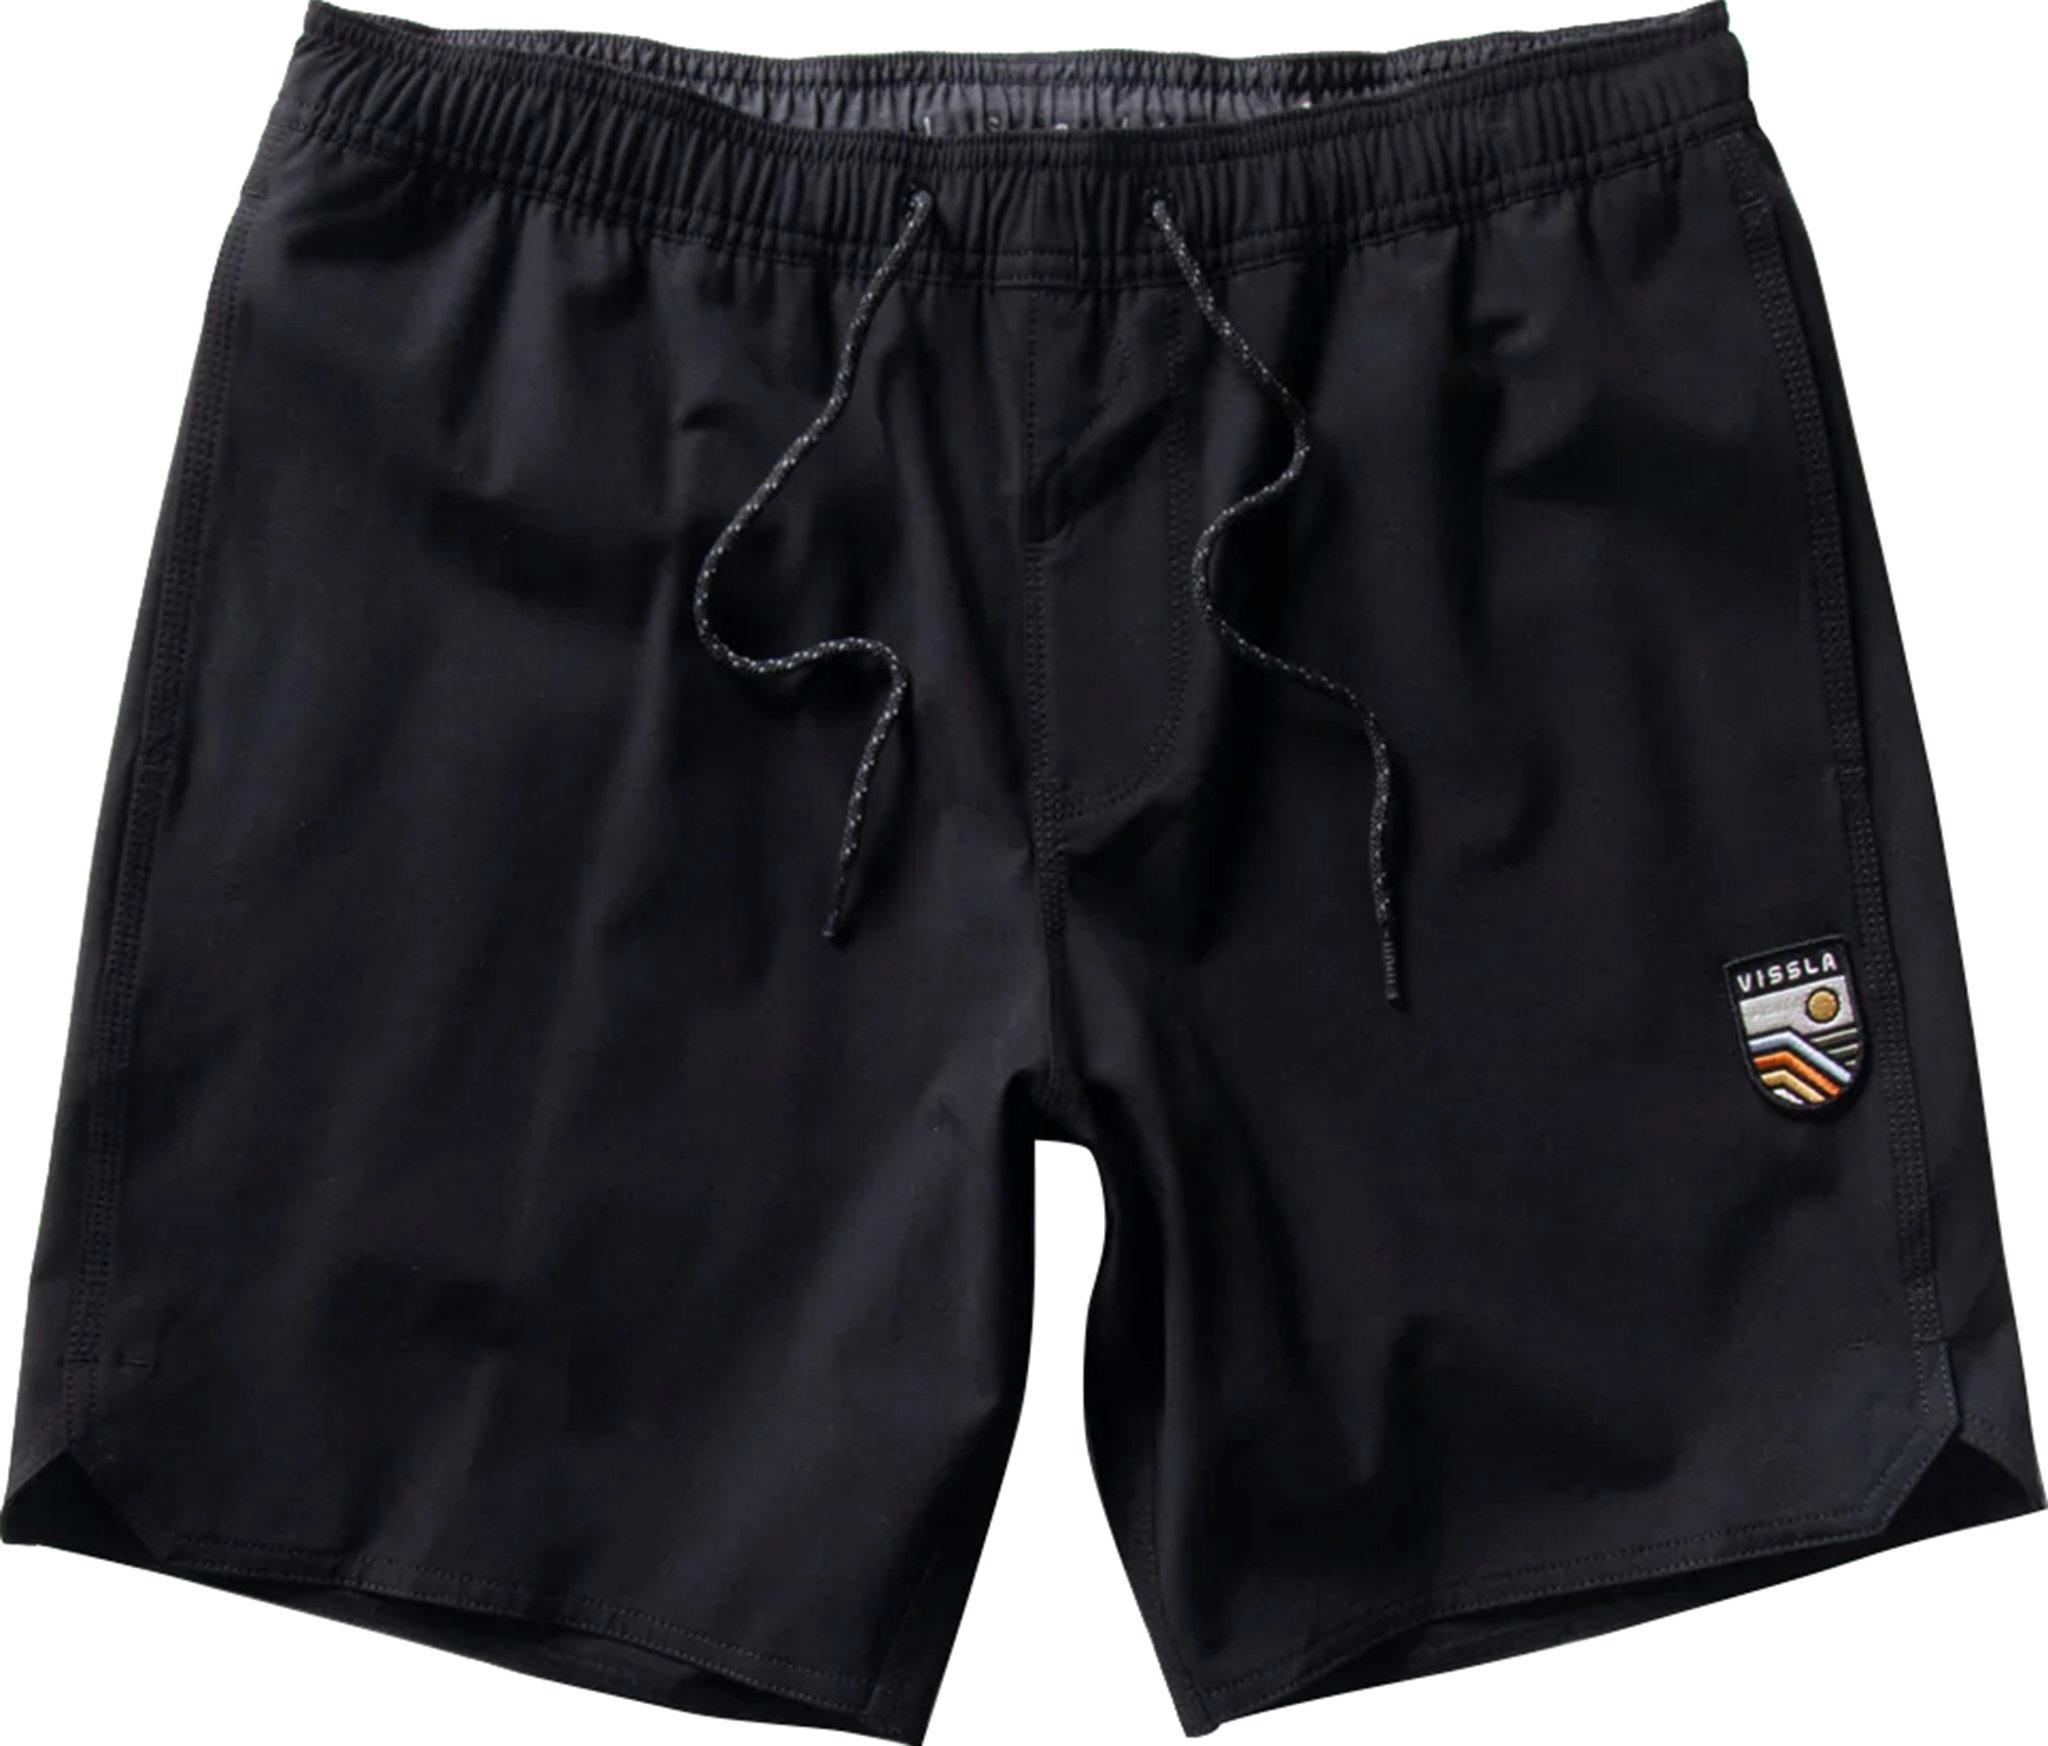 Product image for Solid Sets Ecolastic 16 In Boardshorts - Boys